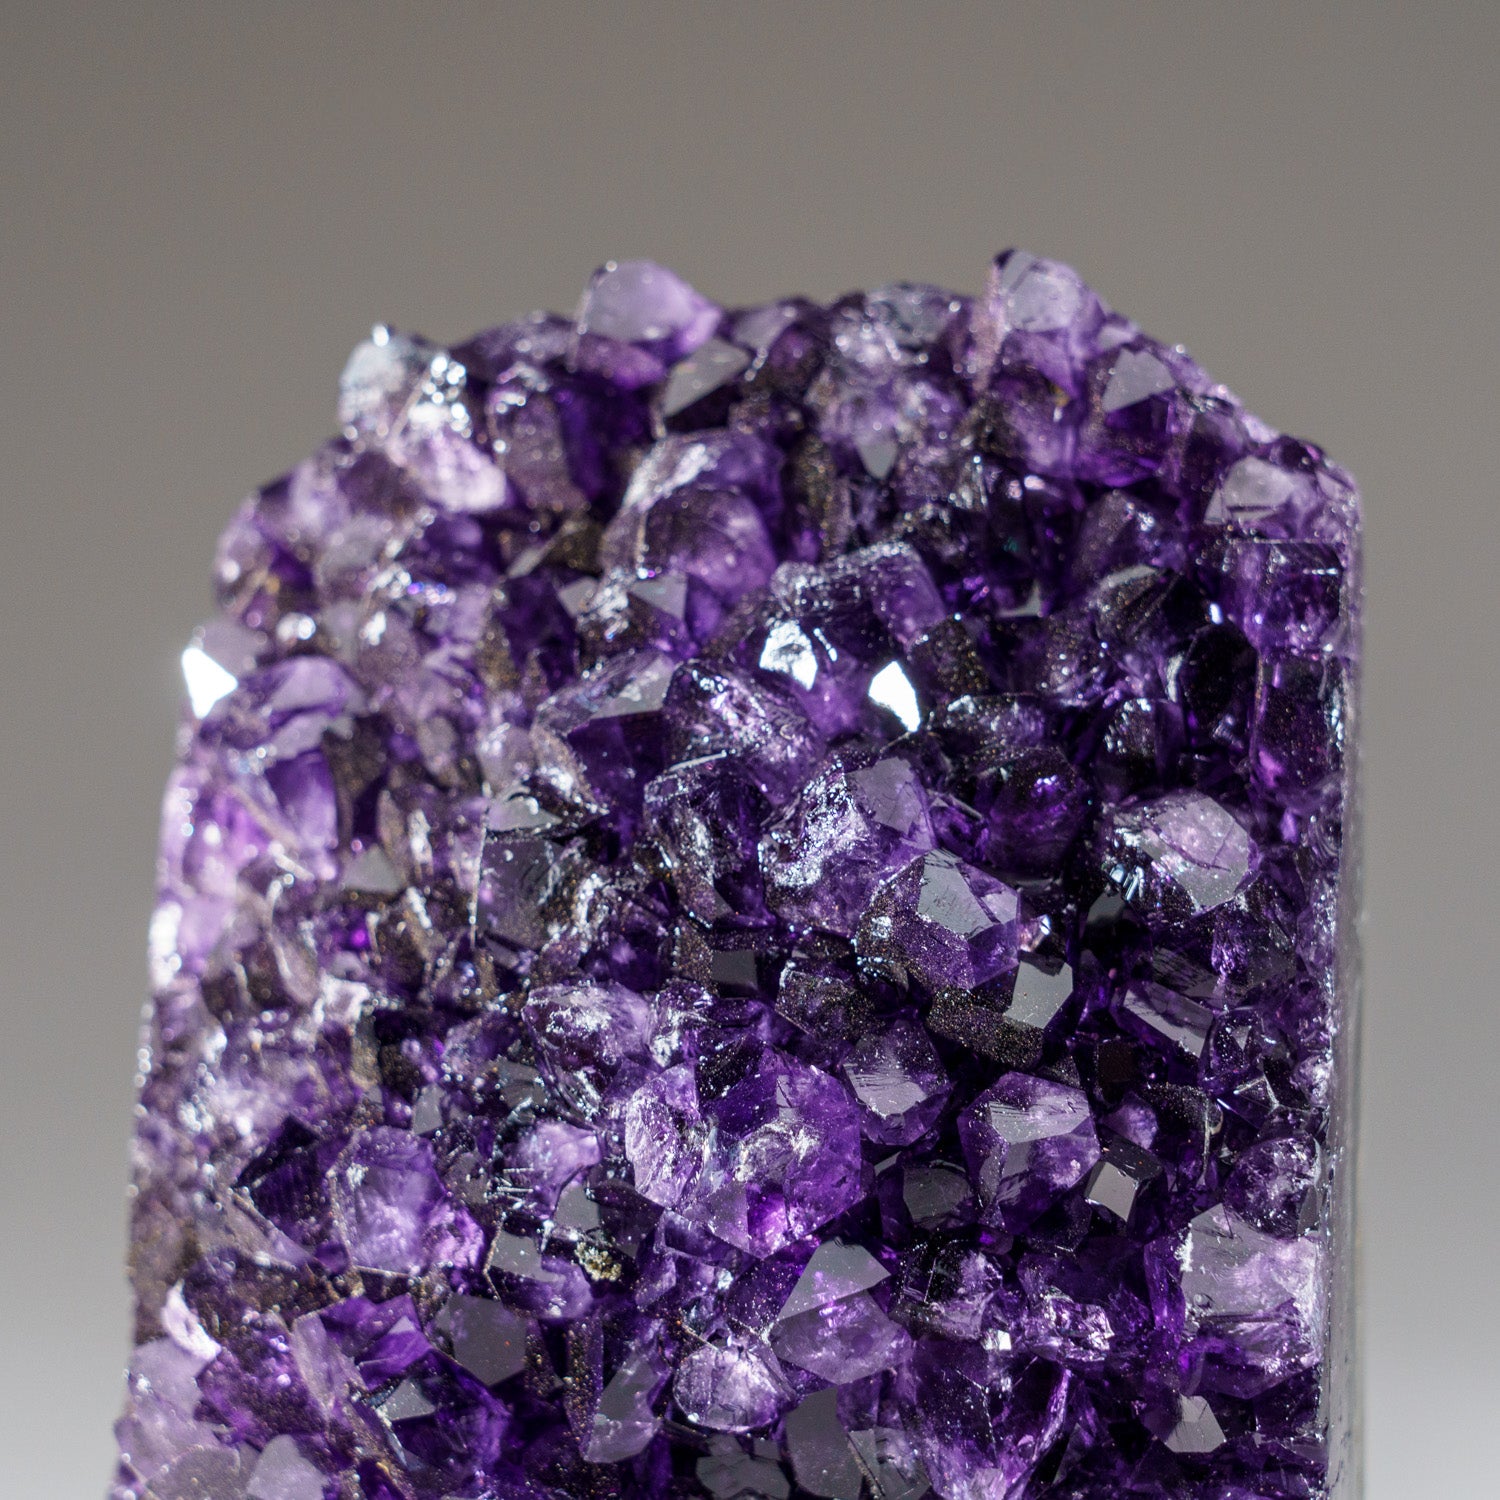 Genuine Amethyst Crystal Cluster from Brazil (2.6 lbs)